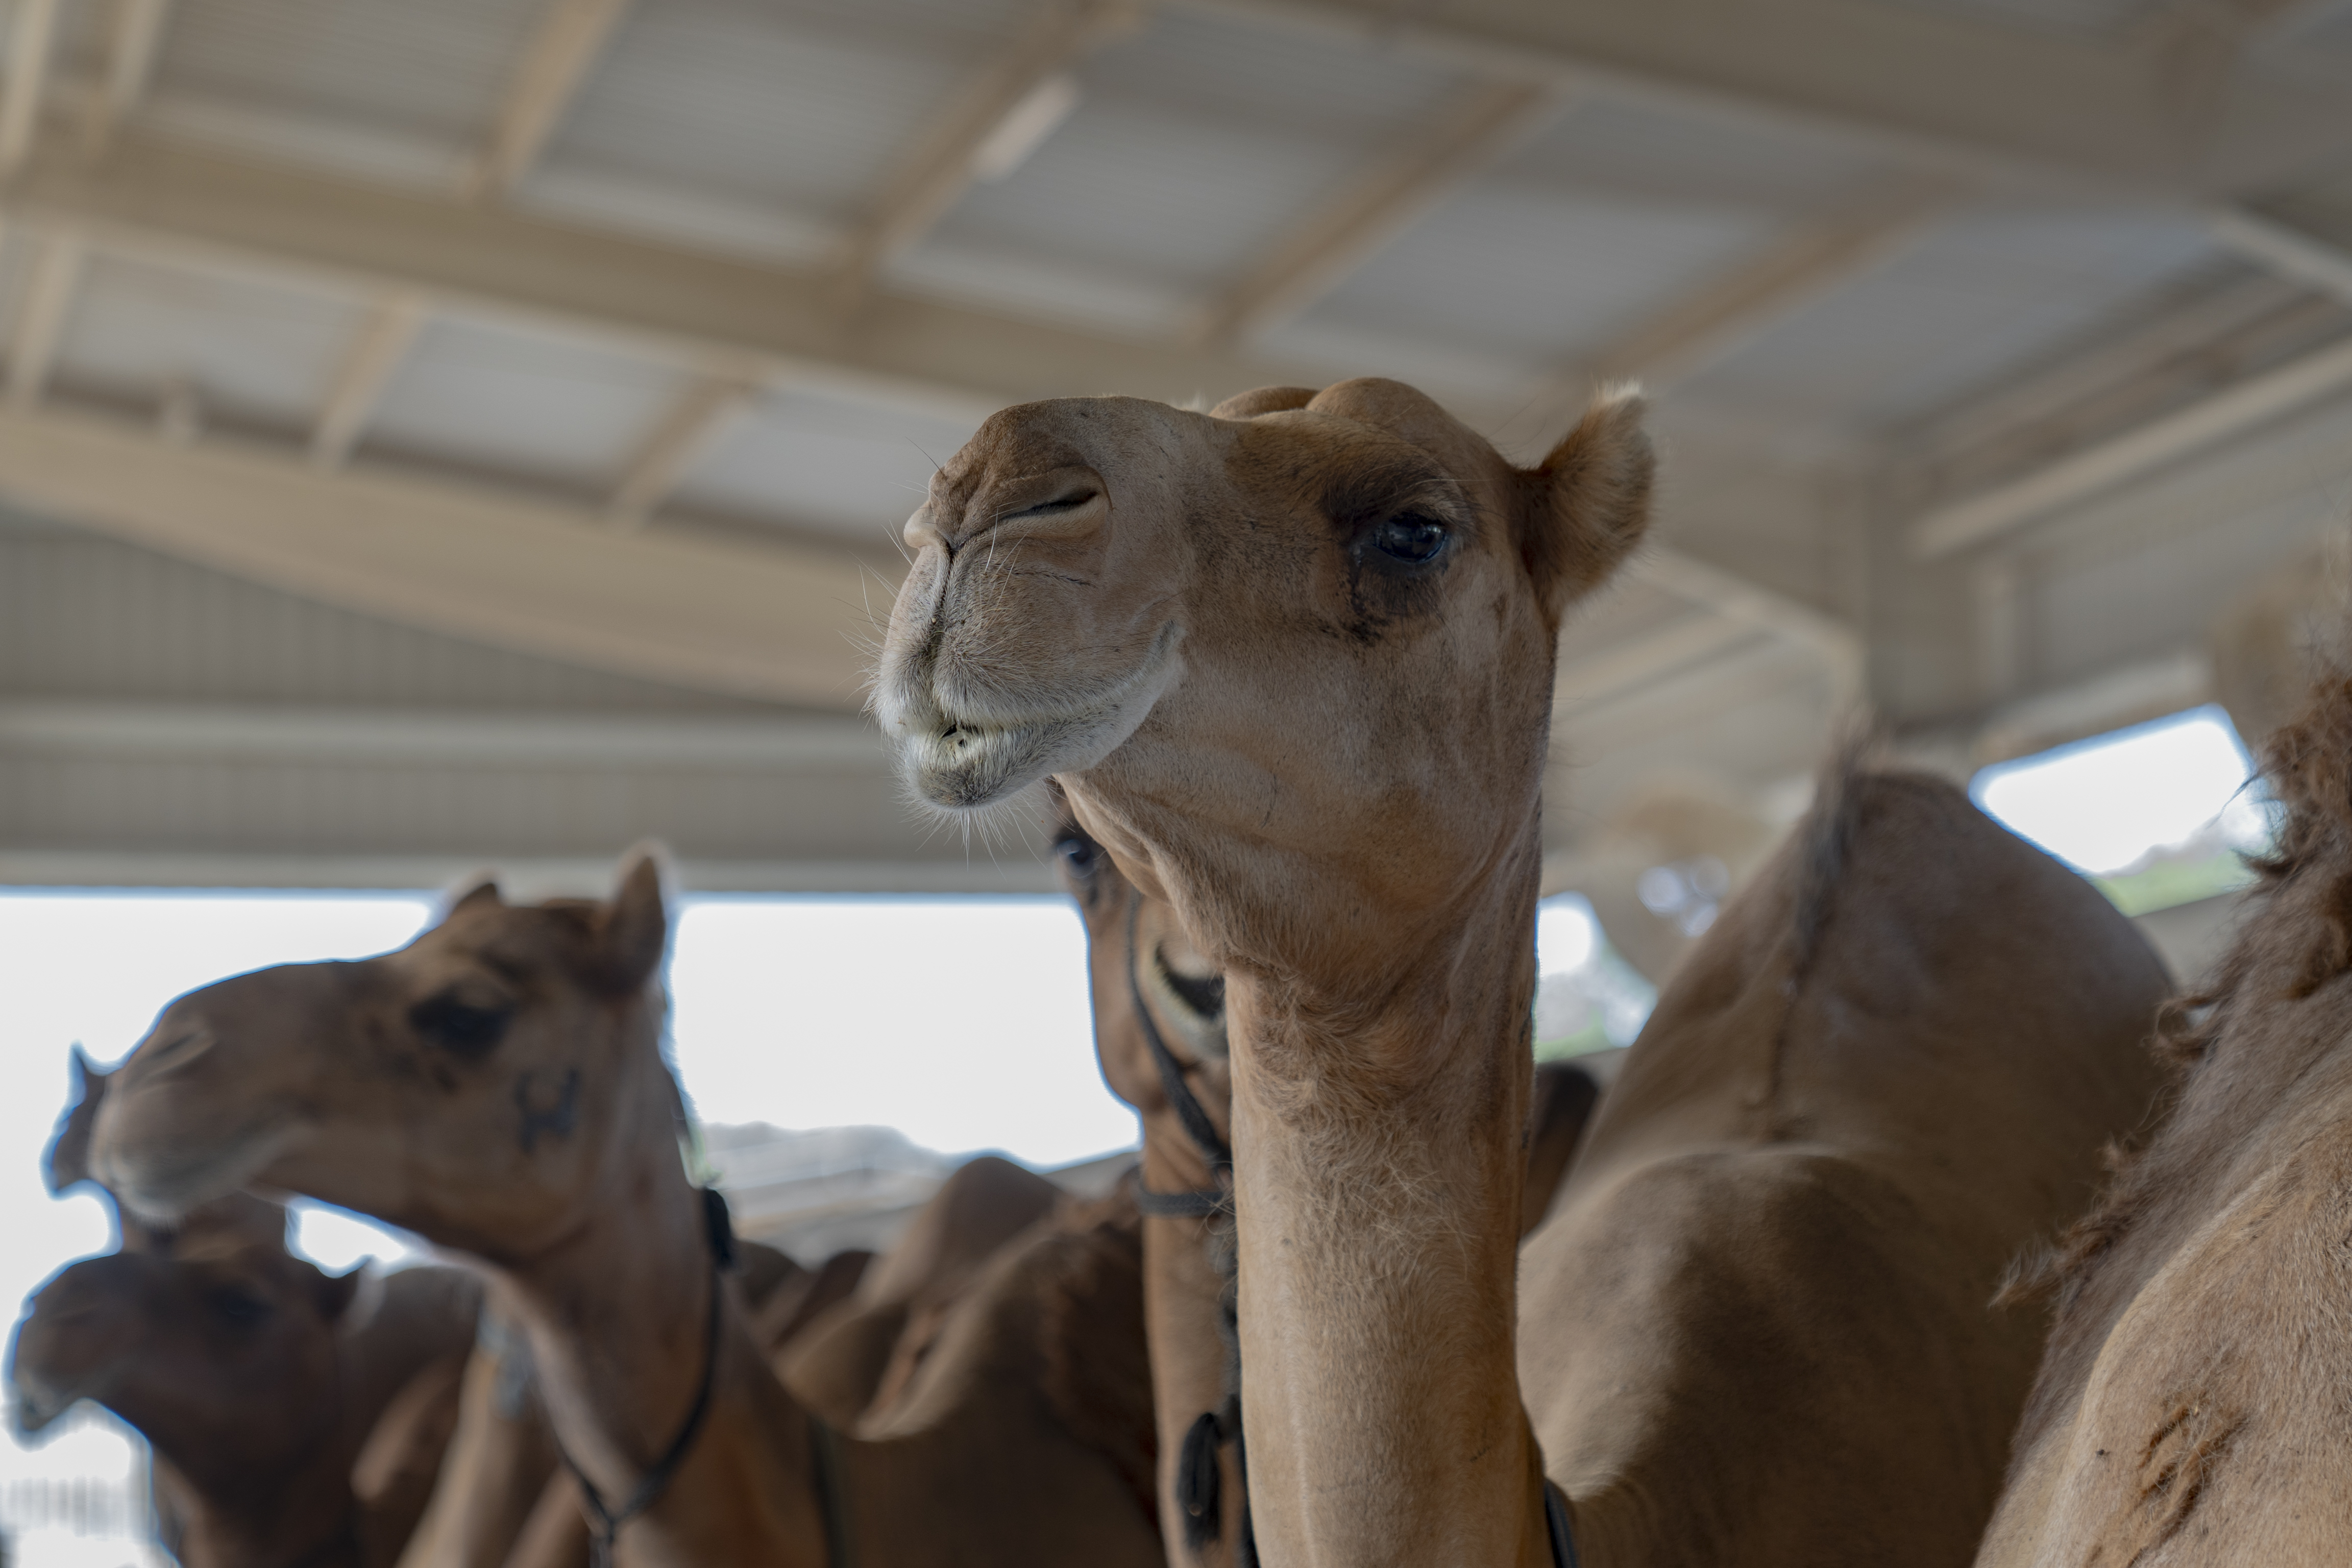 A photo taken on September 4, 2023 shows camels at the Royal Camel Farm on the outskirts of Dubai in the United Arab Emirates. /CGTN 